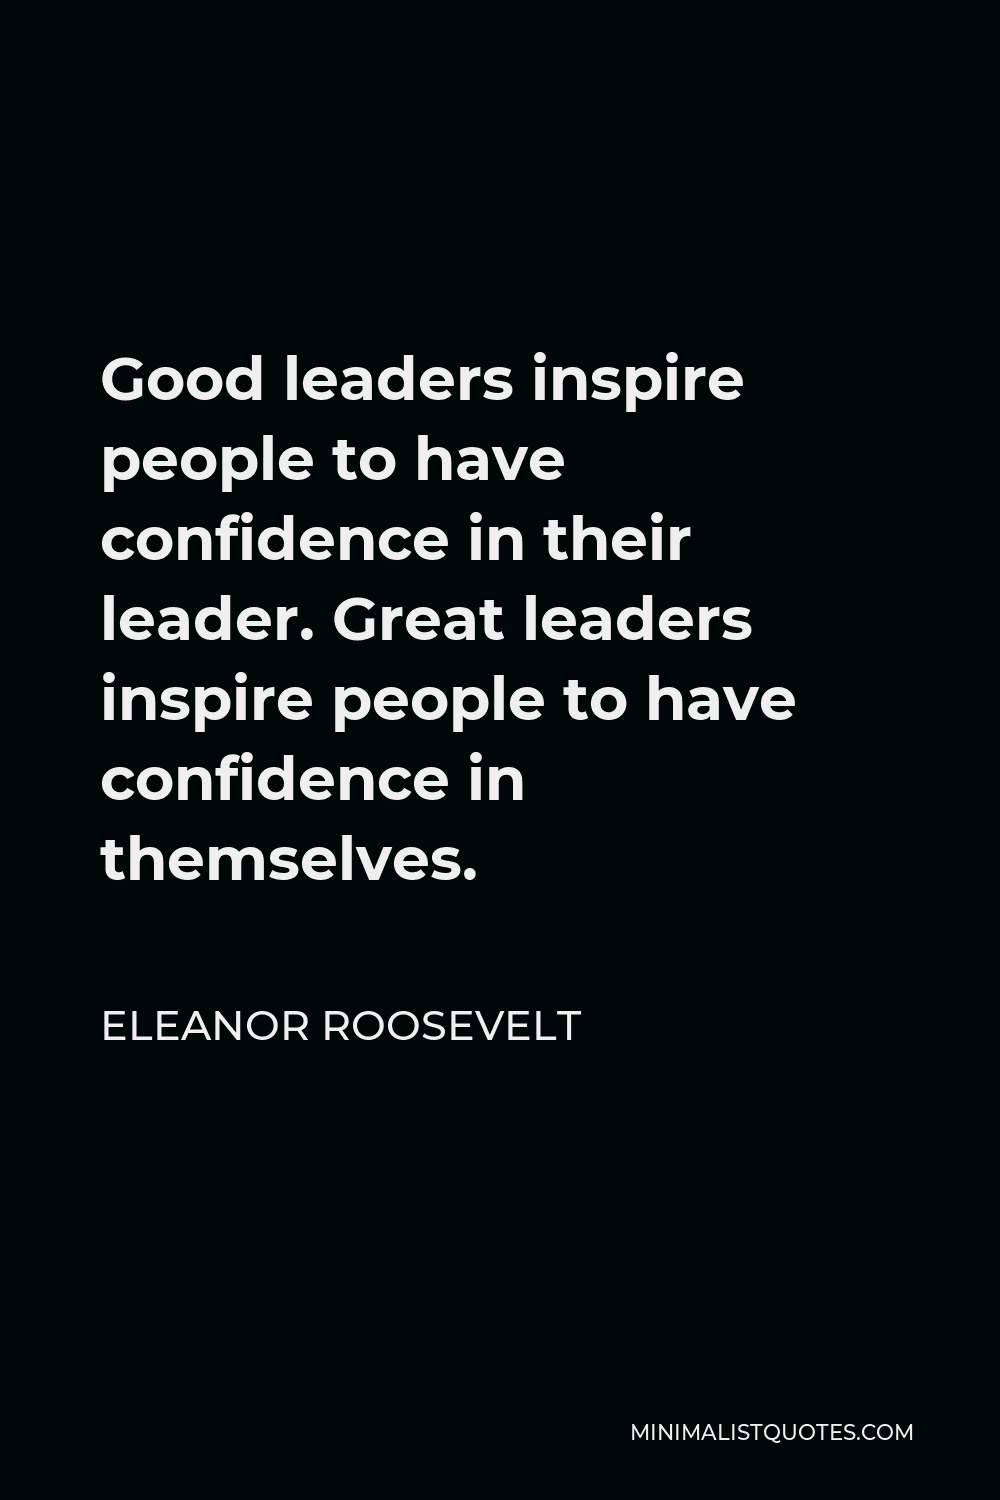 Eleanor Roosevelt Quote - Good leaders inspire people to have confidence in their leader. Great leaders inspire people to have confidence in themselves.